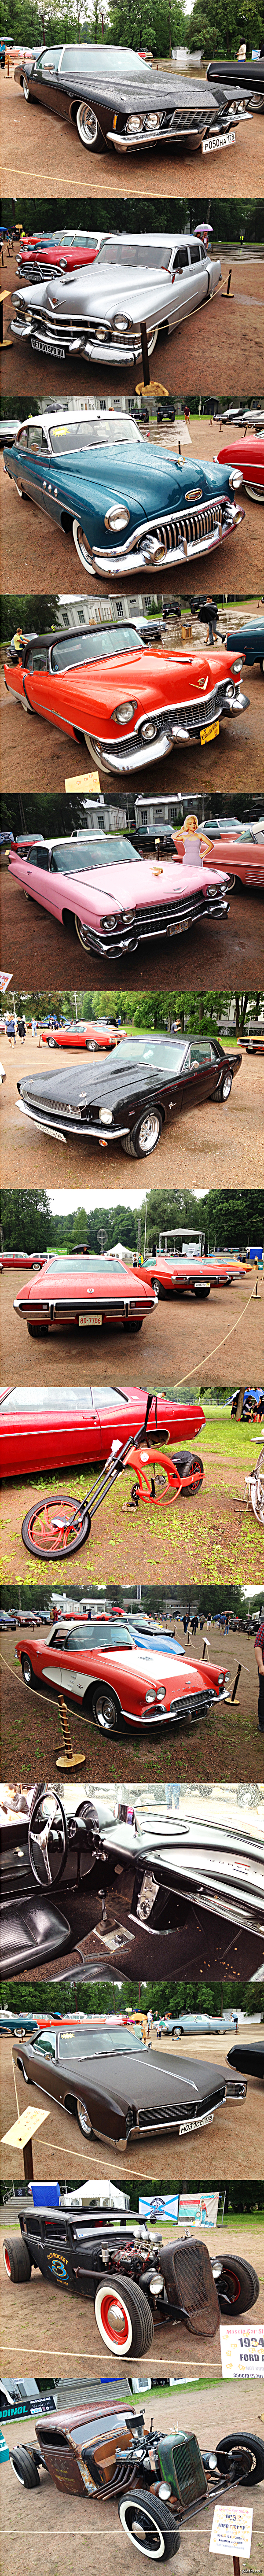 Muscle Car Show   .    , )))